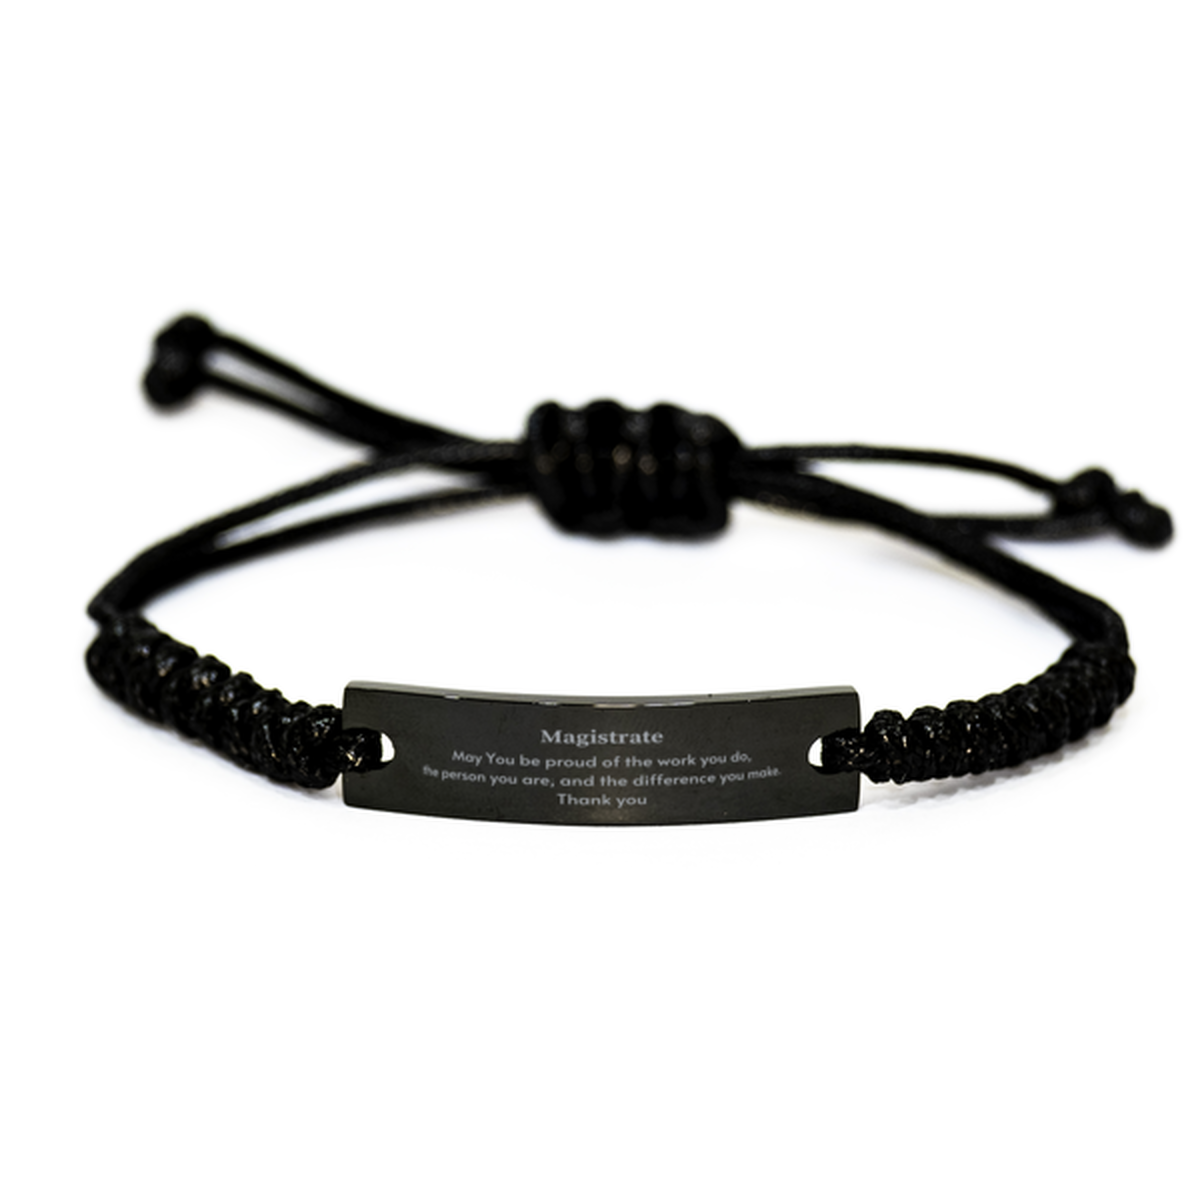 Heartwarming Black Rope Bracelet Retirement Coworkers Gifts for Magistrate, Magistrate May You be proud of the work you do, the person you are Gifts for Boss Men Women Friends